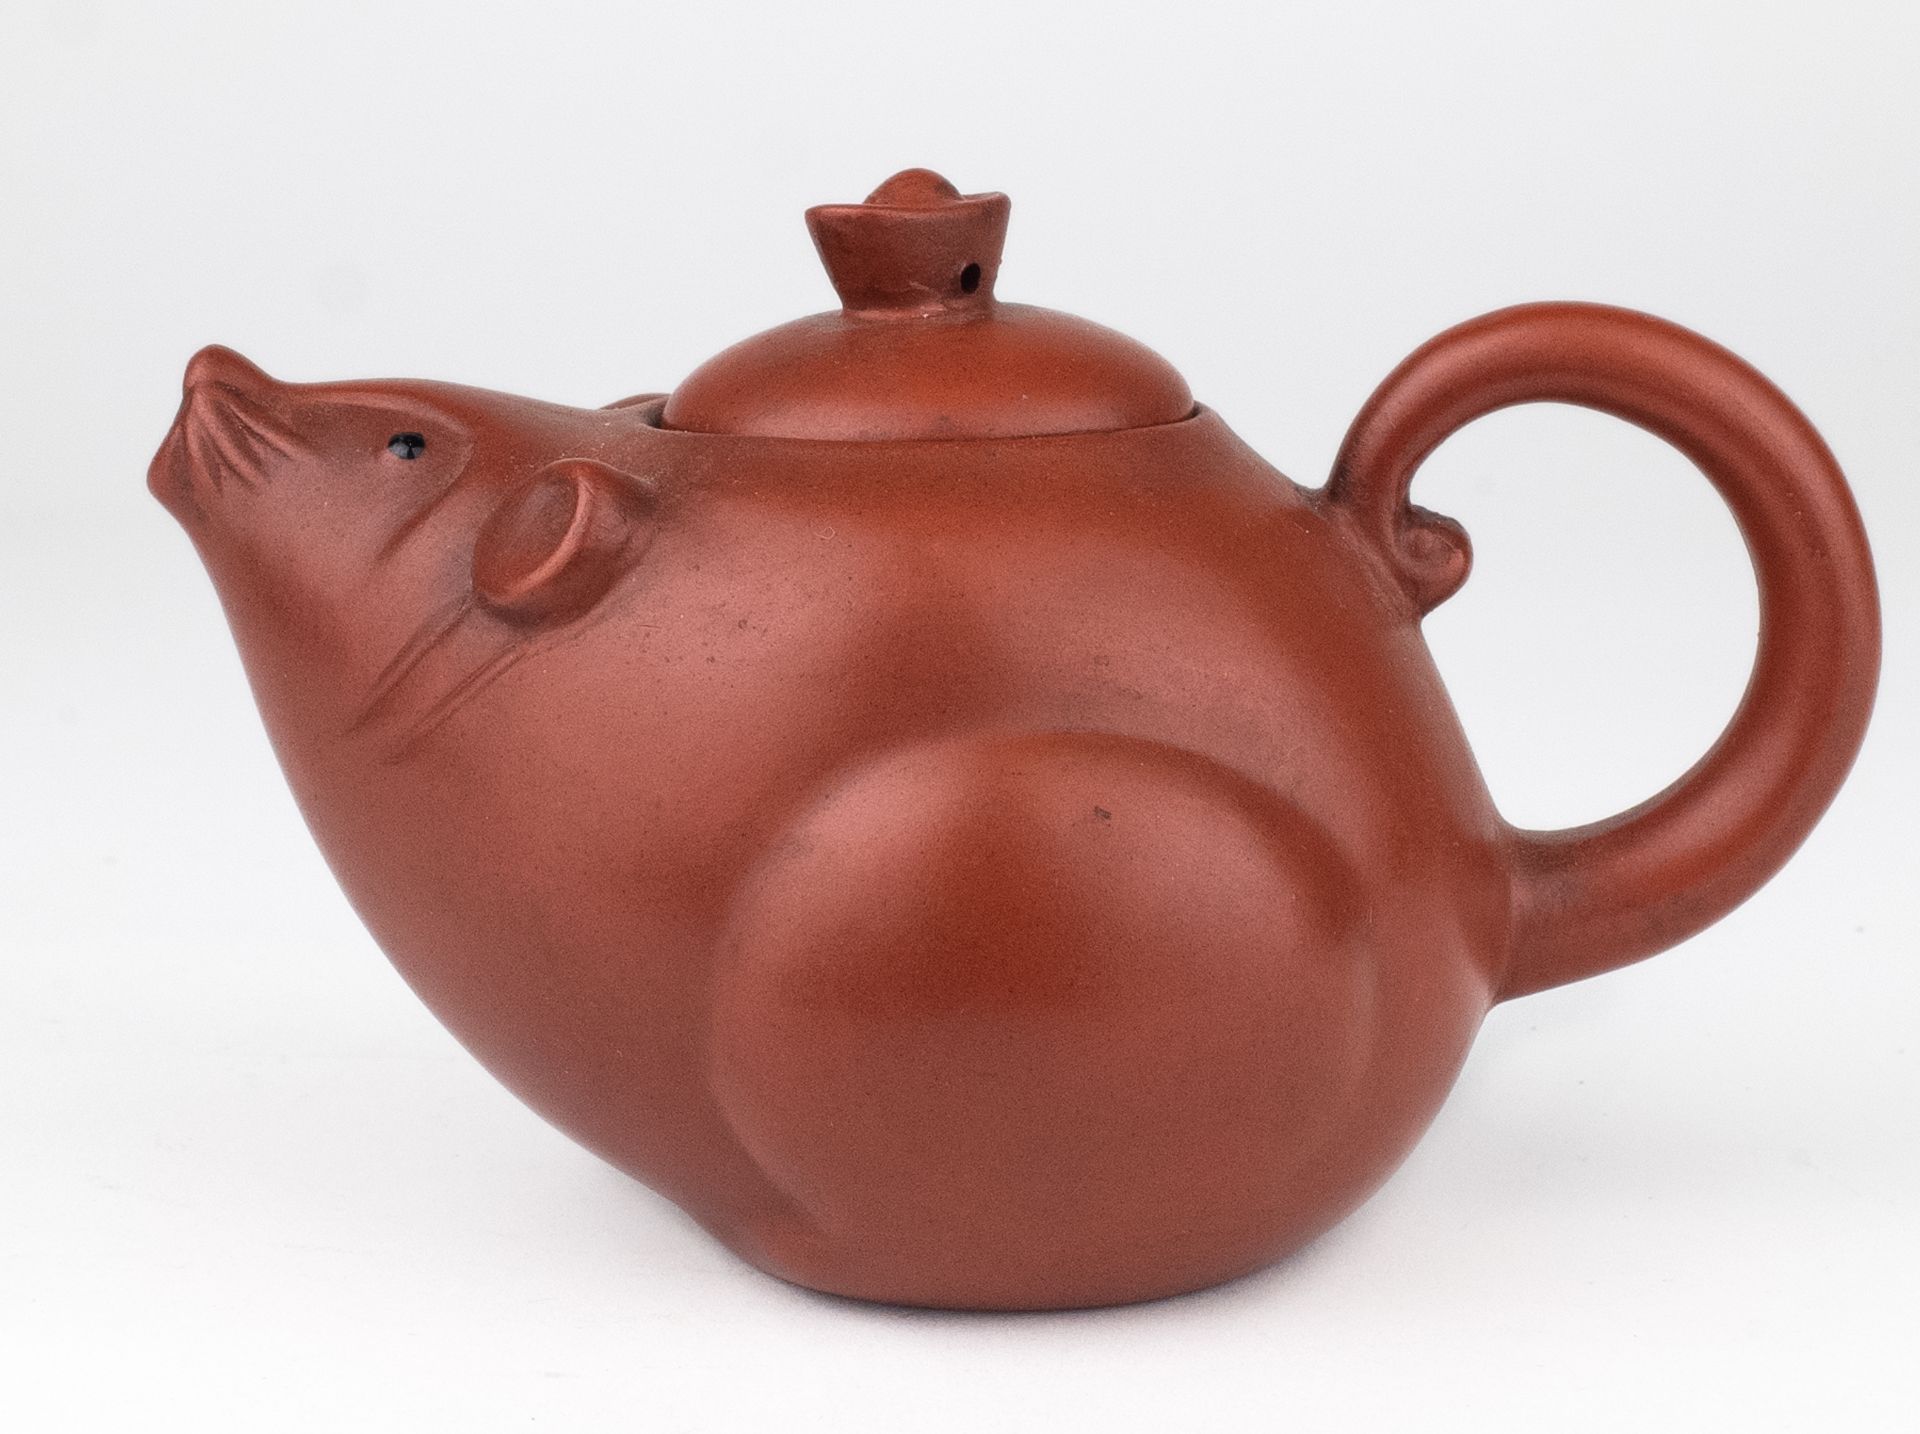 A 20th century Chinese Yixing teapot